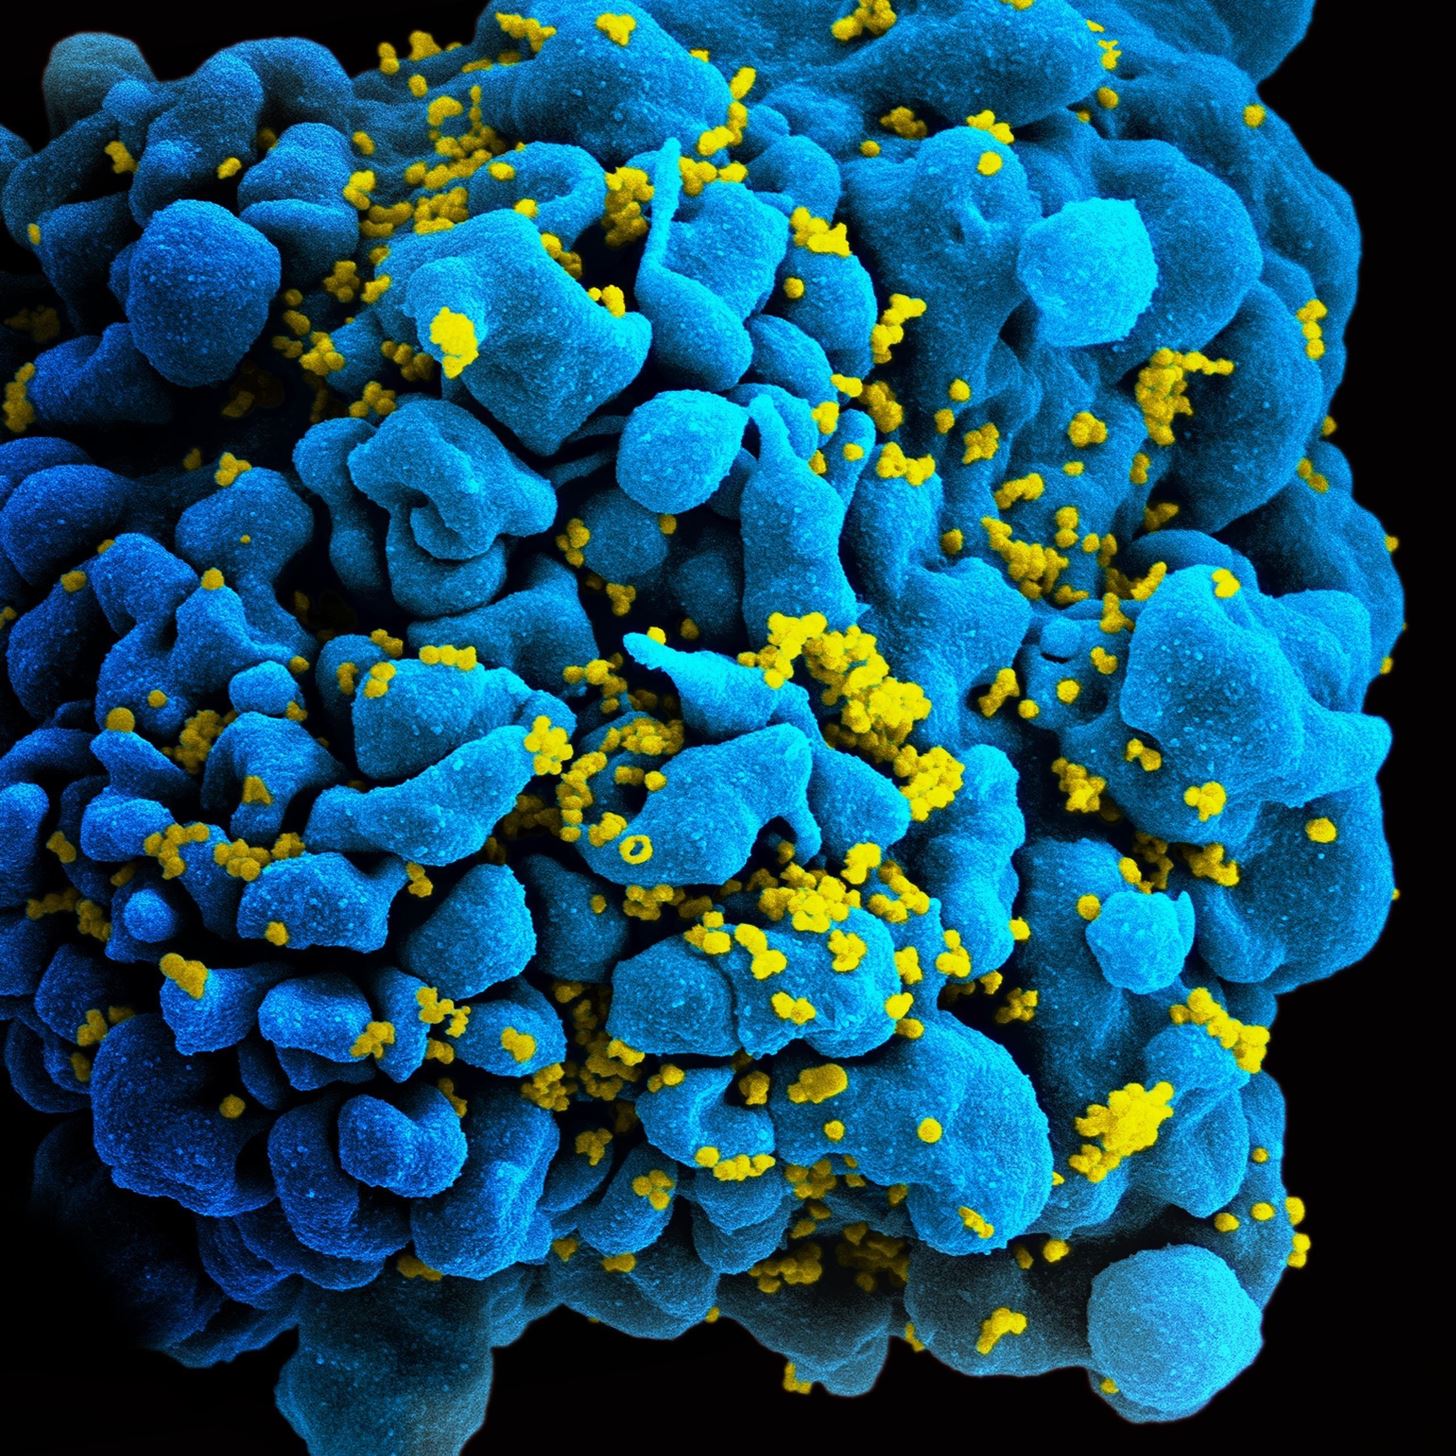 The Body's Own Cells Can Be Engineered to Protect Against HIV Infection